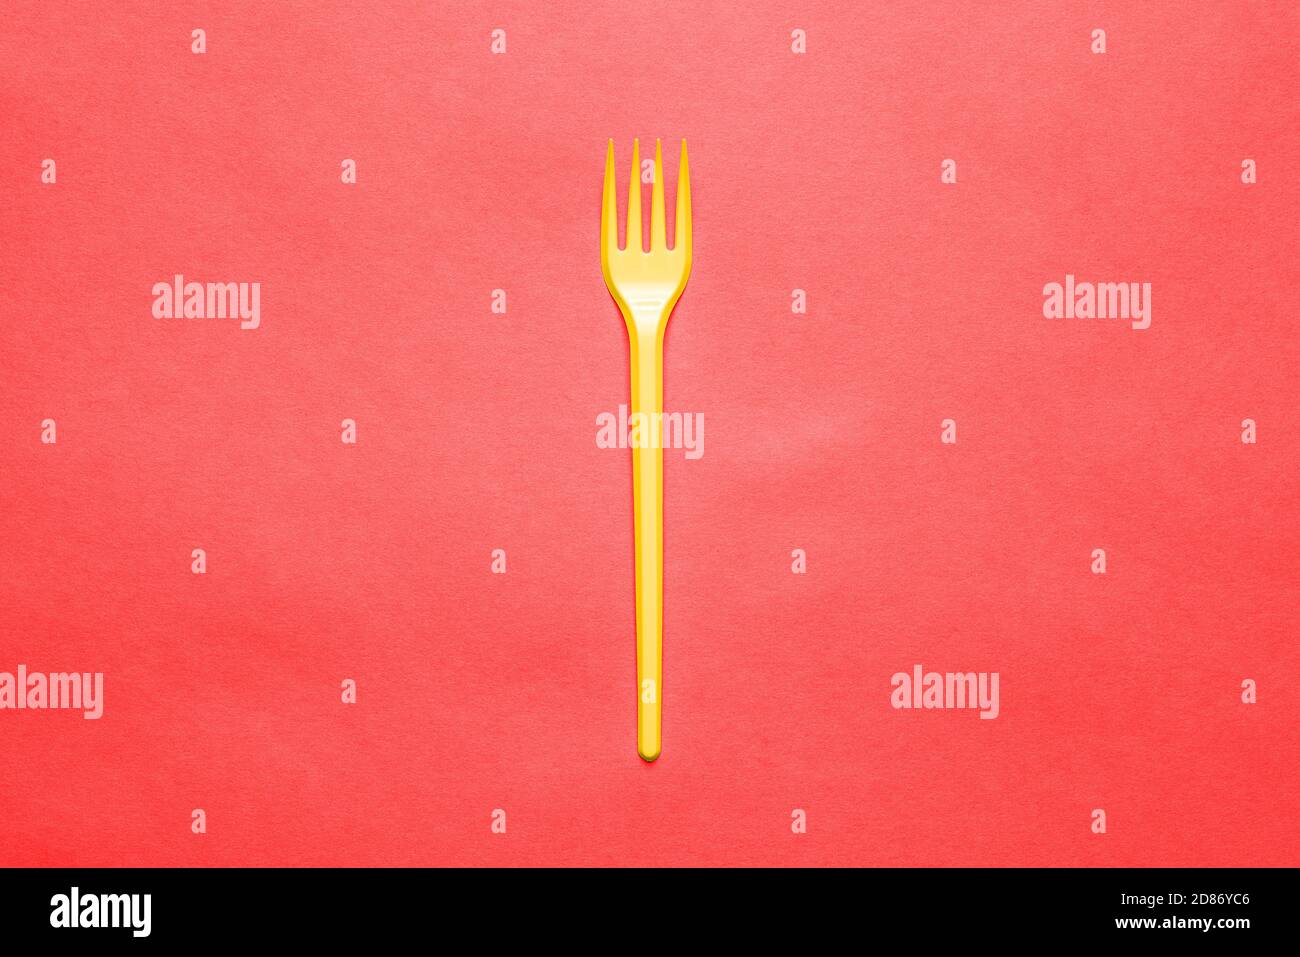 Yellow plastic fork on a red background. Disposable Cutlery for eating. Dinnerware. Creative minimal style Stock Photo